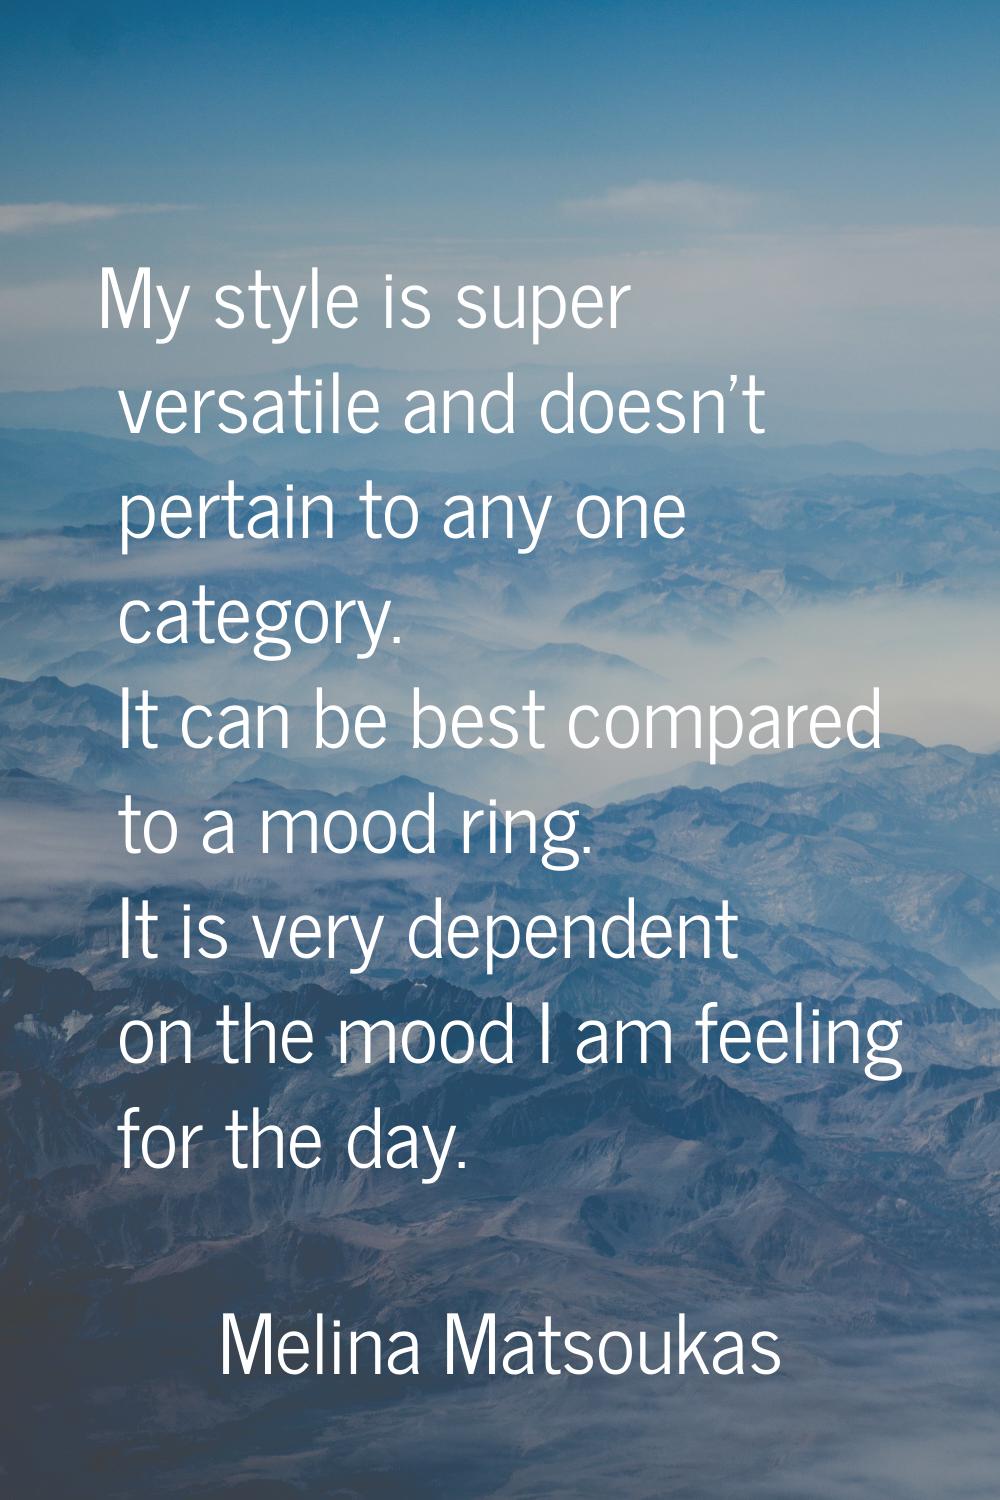 My style is super versatile and doesn't pertain to any one category. It can be best compared to a m